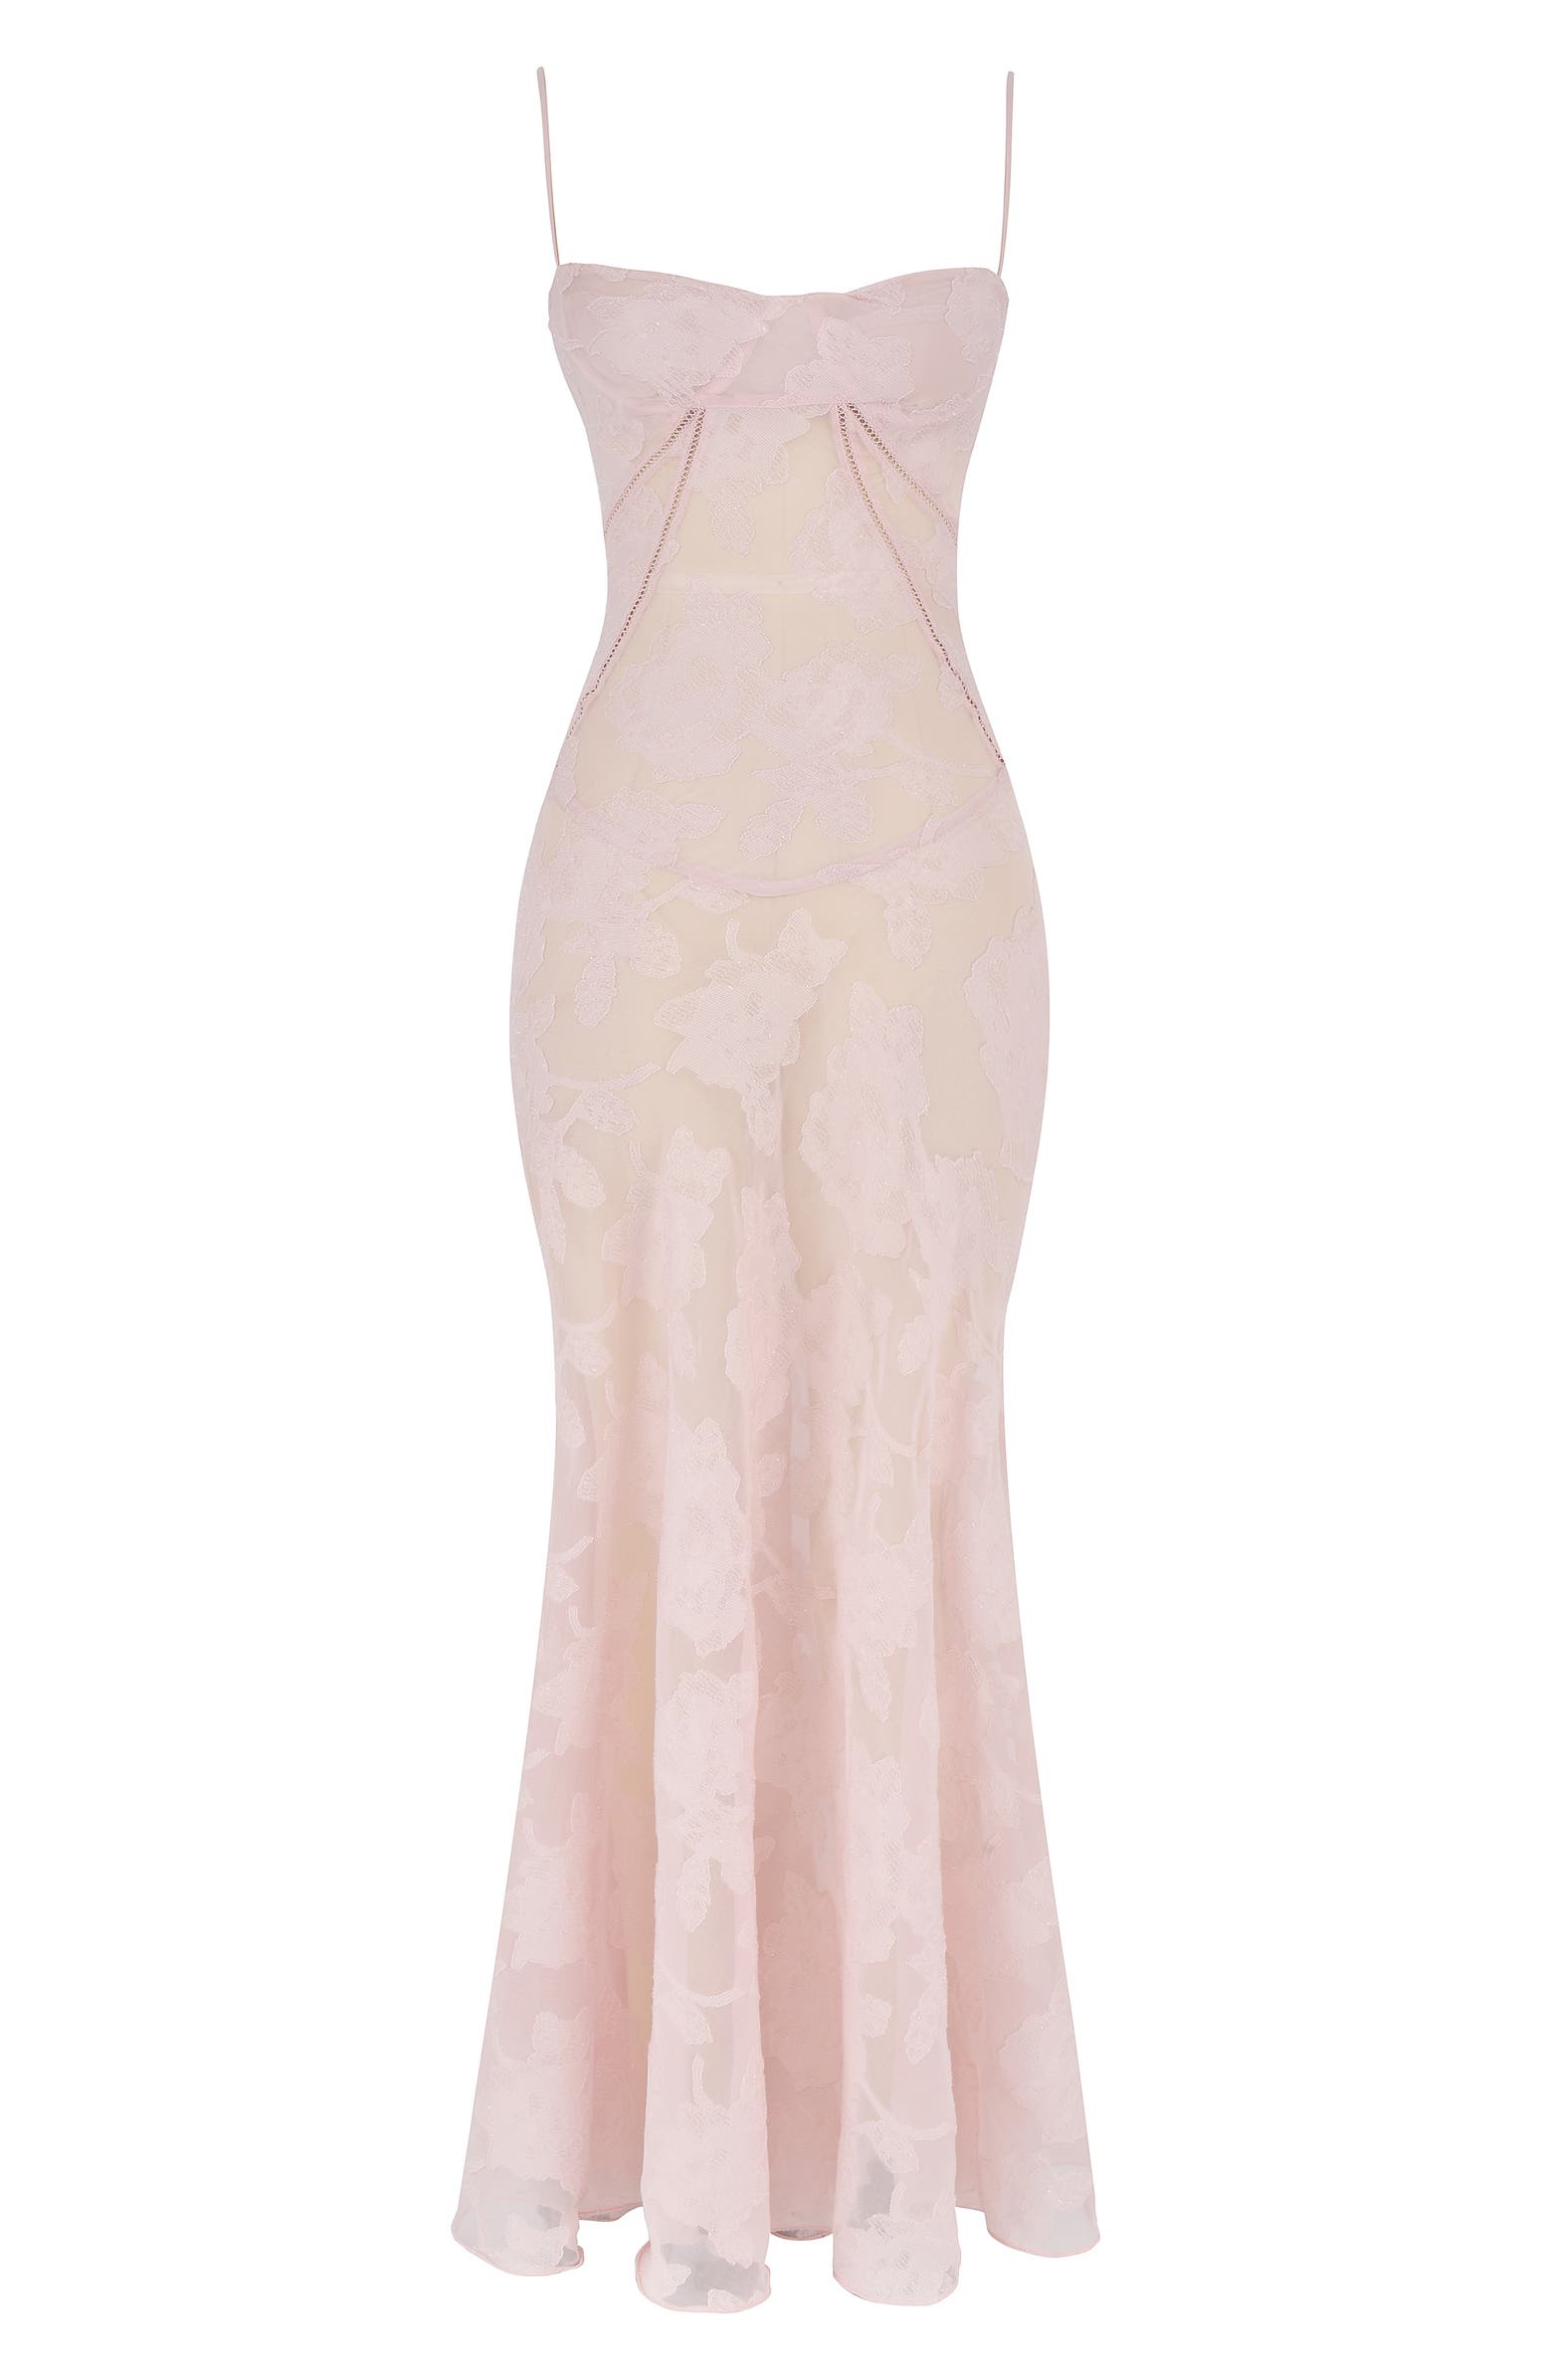 HOUSE OF CB Seren Blush Lace-Up Back Gown | Nordstrom